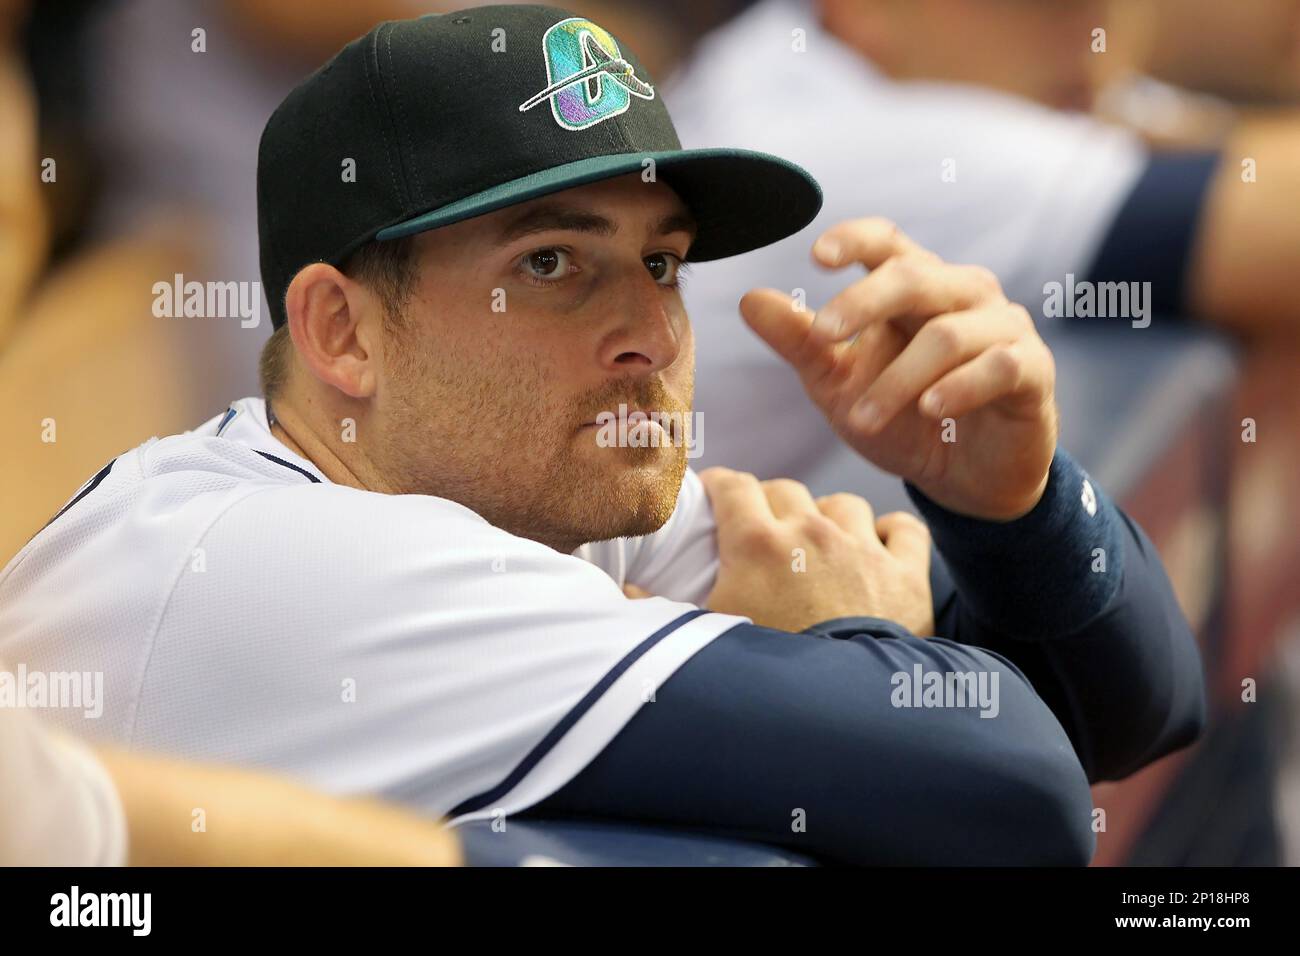 17 JUN 2016: Brad Miller of the Rays sporting the Orlando Rays hat